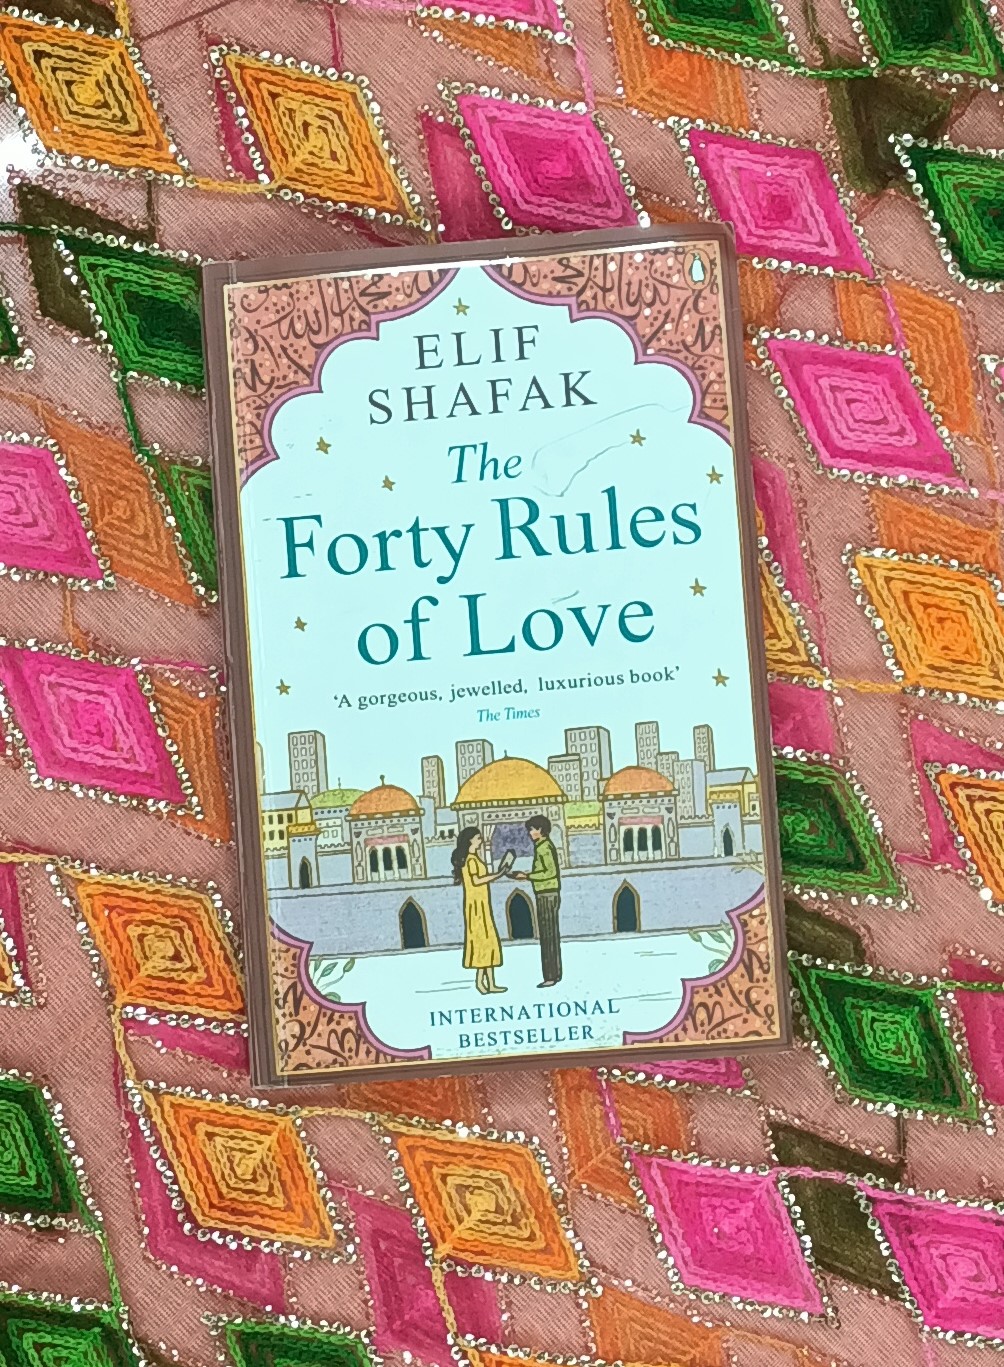 book review of 40 rules of love